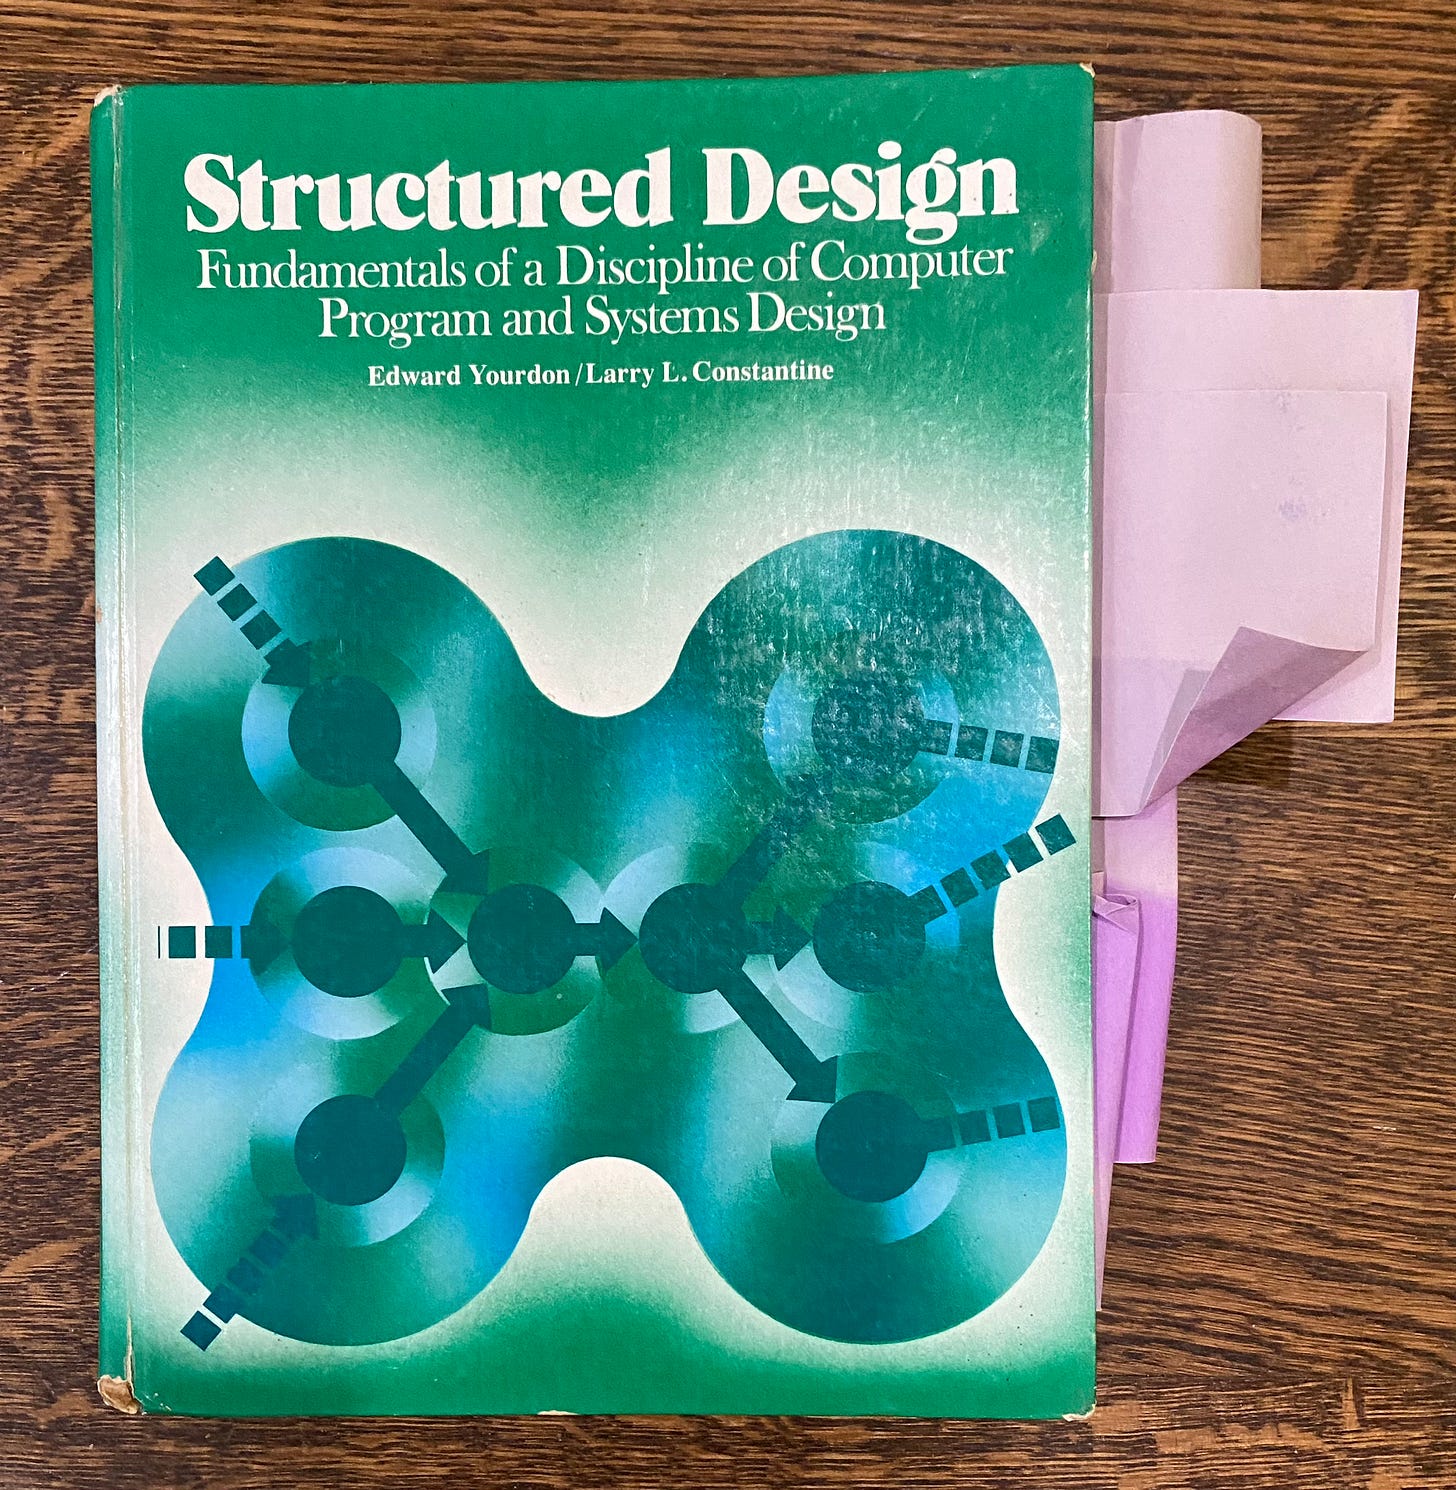 The book Structured Design on a background of stained wood, several post-its sticking out.